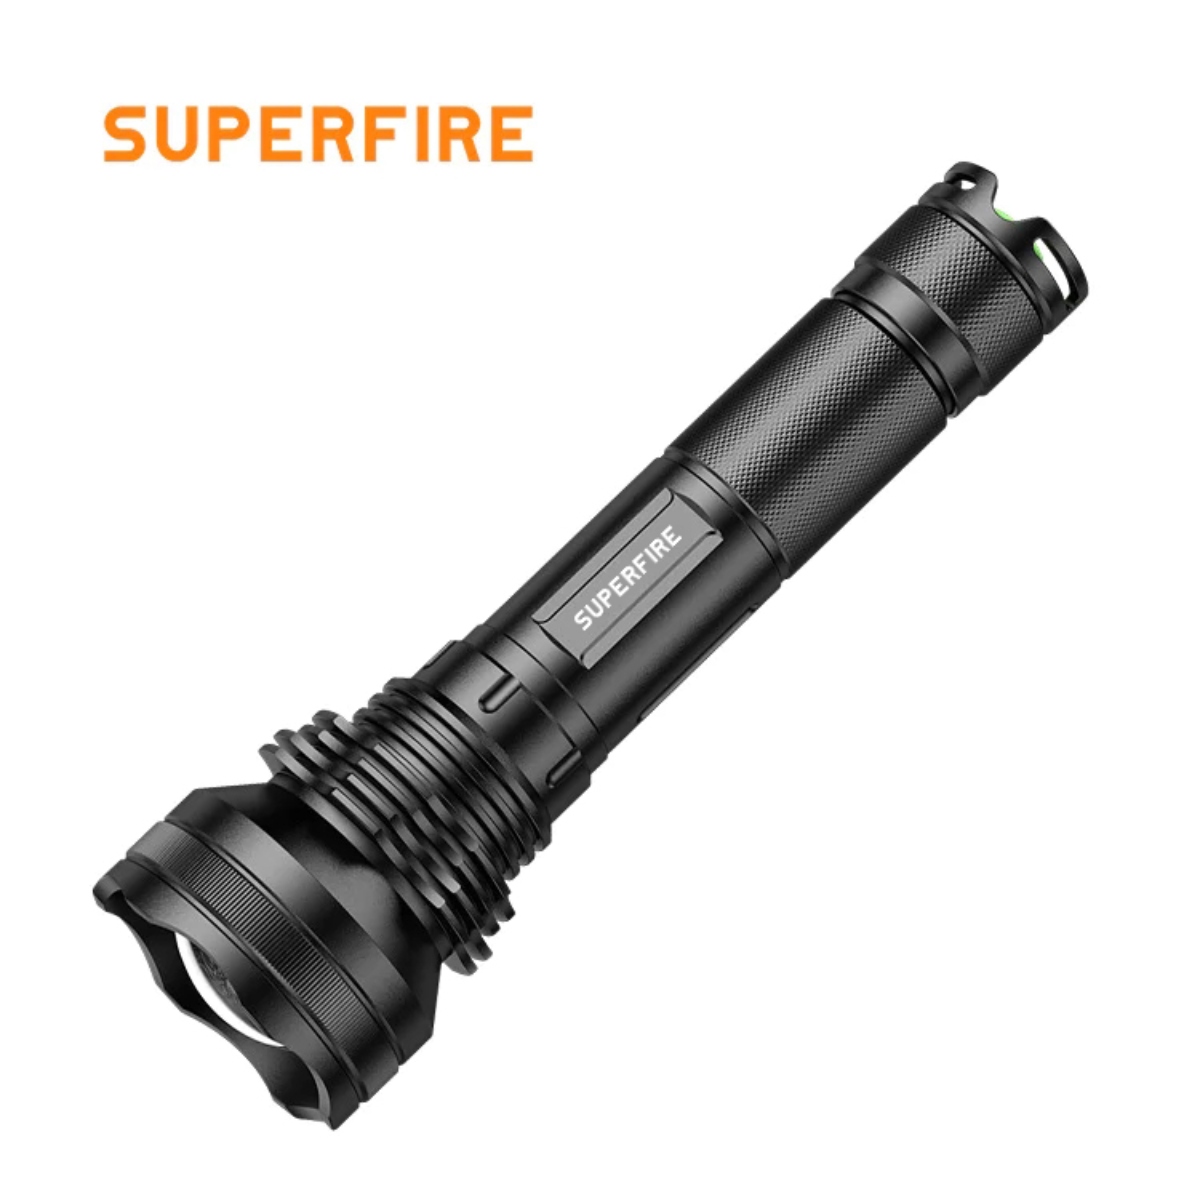 SUPERFIRE L3-P90 zoomable flashlight